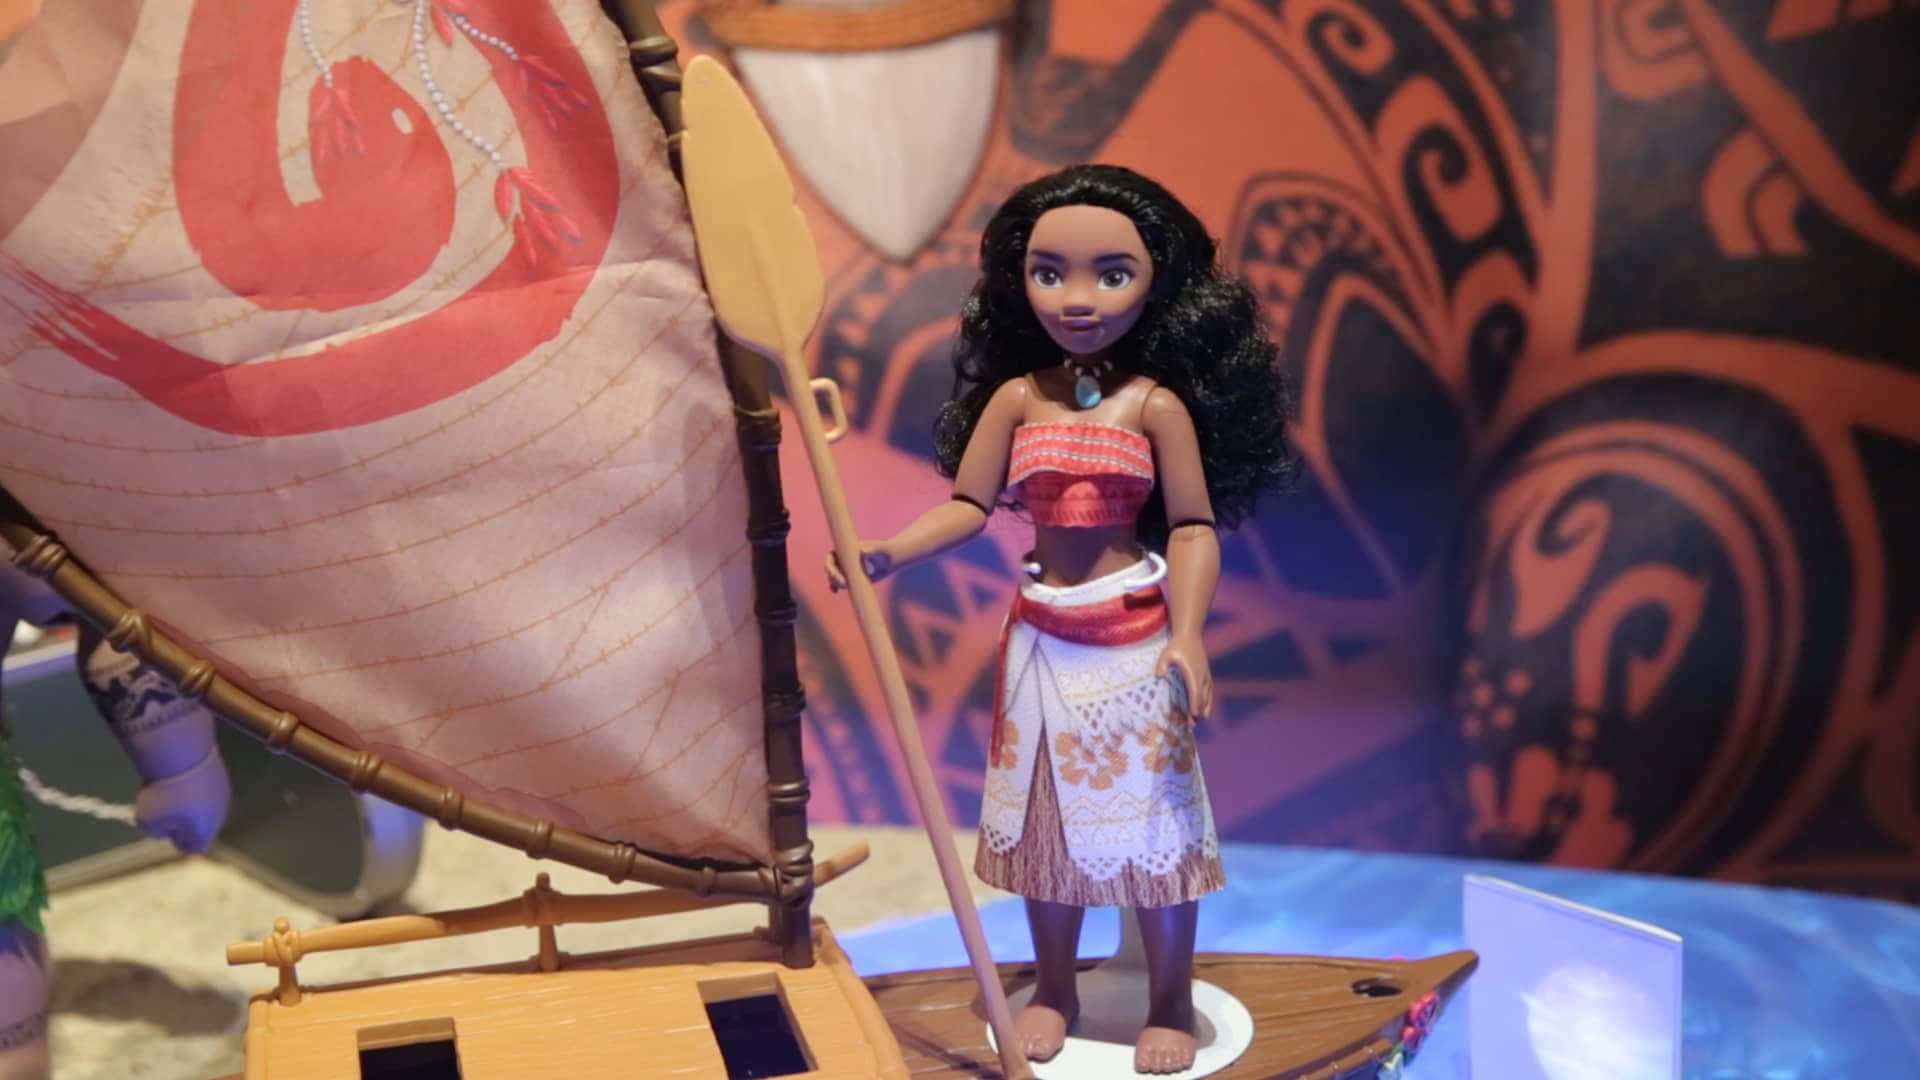 Moana, ready to embark on a journey of self-discovery.